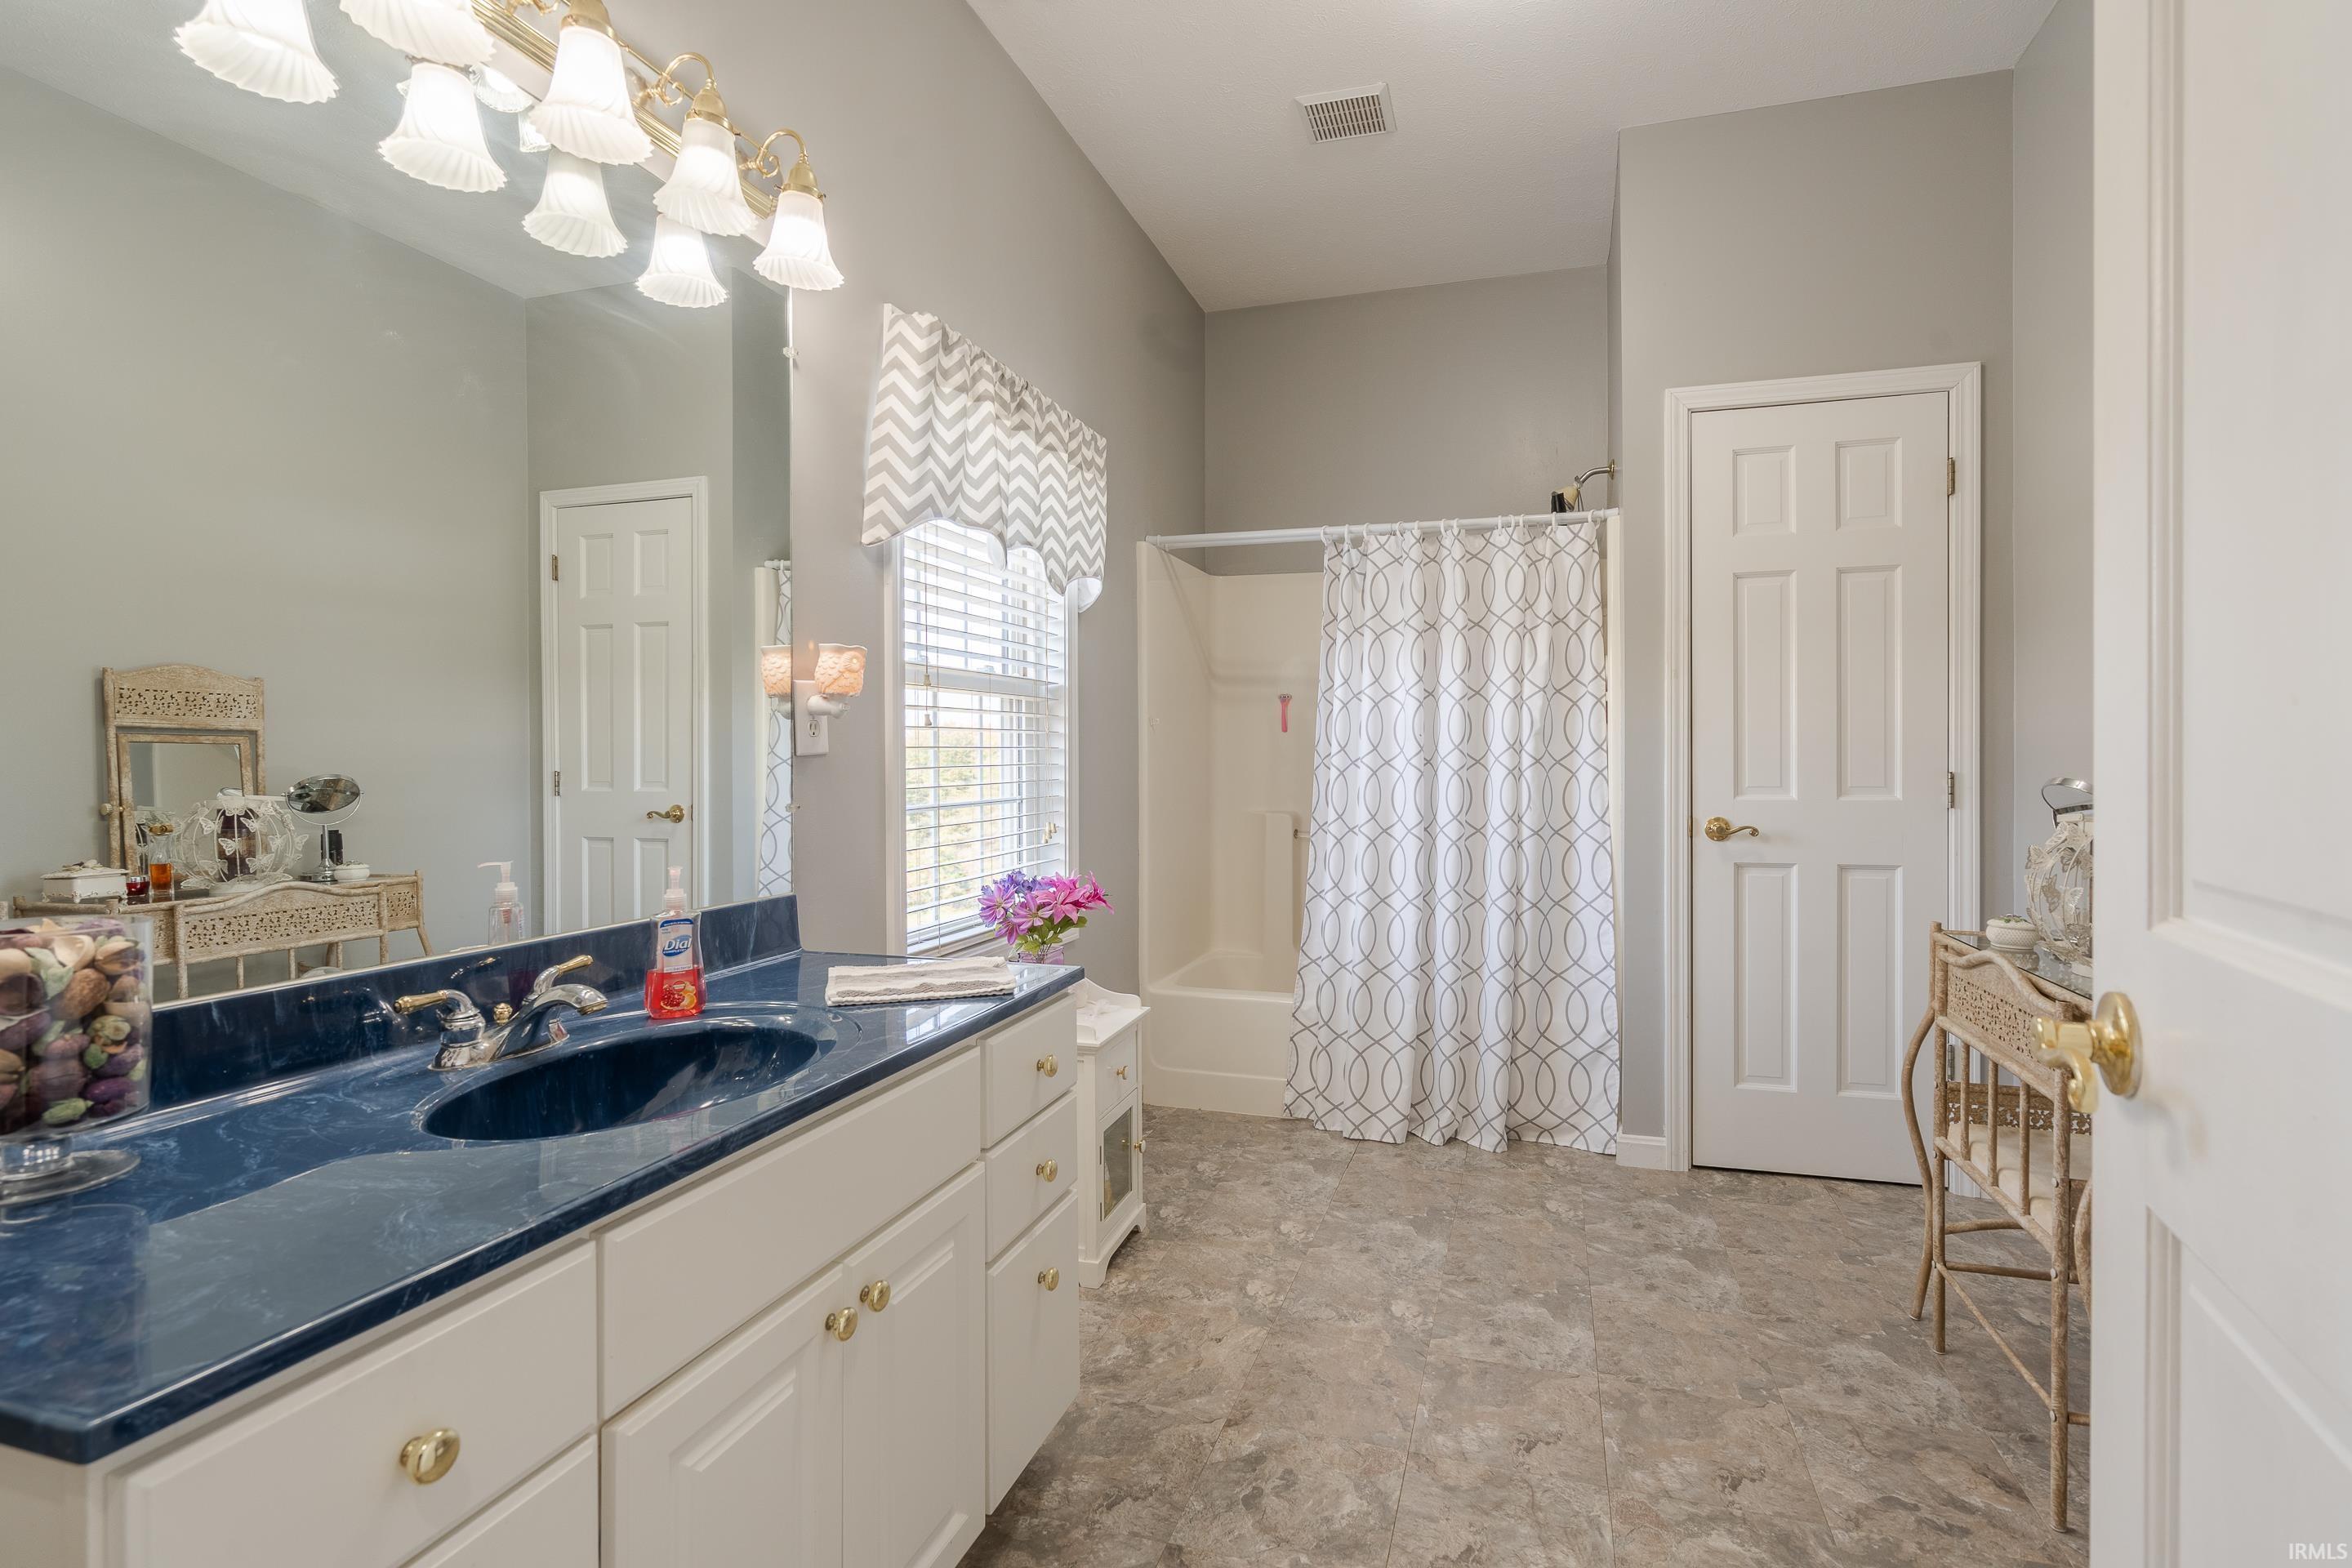 YOU WILL ENJOY THE GREAT SPACE IN THE FULL BATH.  TUB/SHOWER UNIT WITH LINEN CLOSET, VINYL/TILE FLOORING AND A LARGE VANITY.